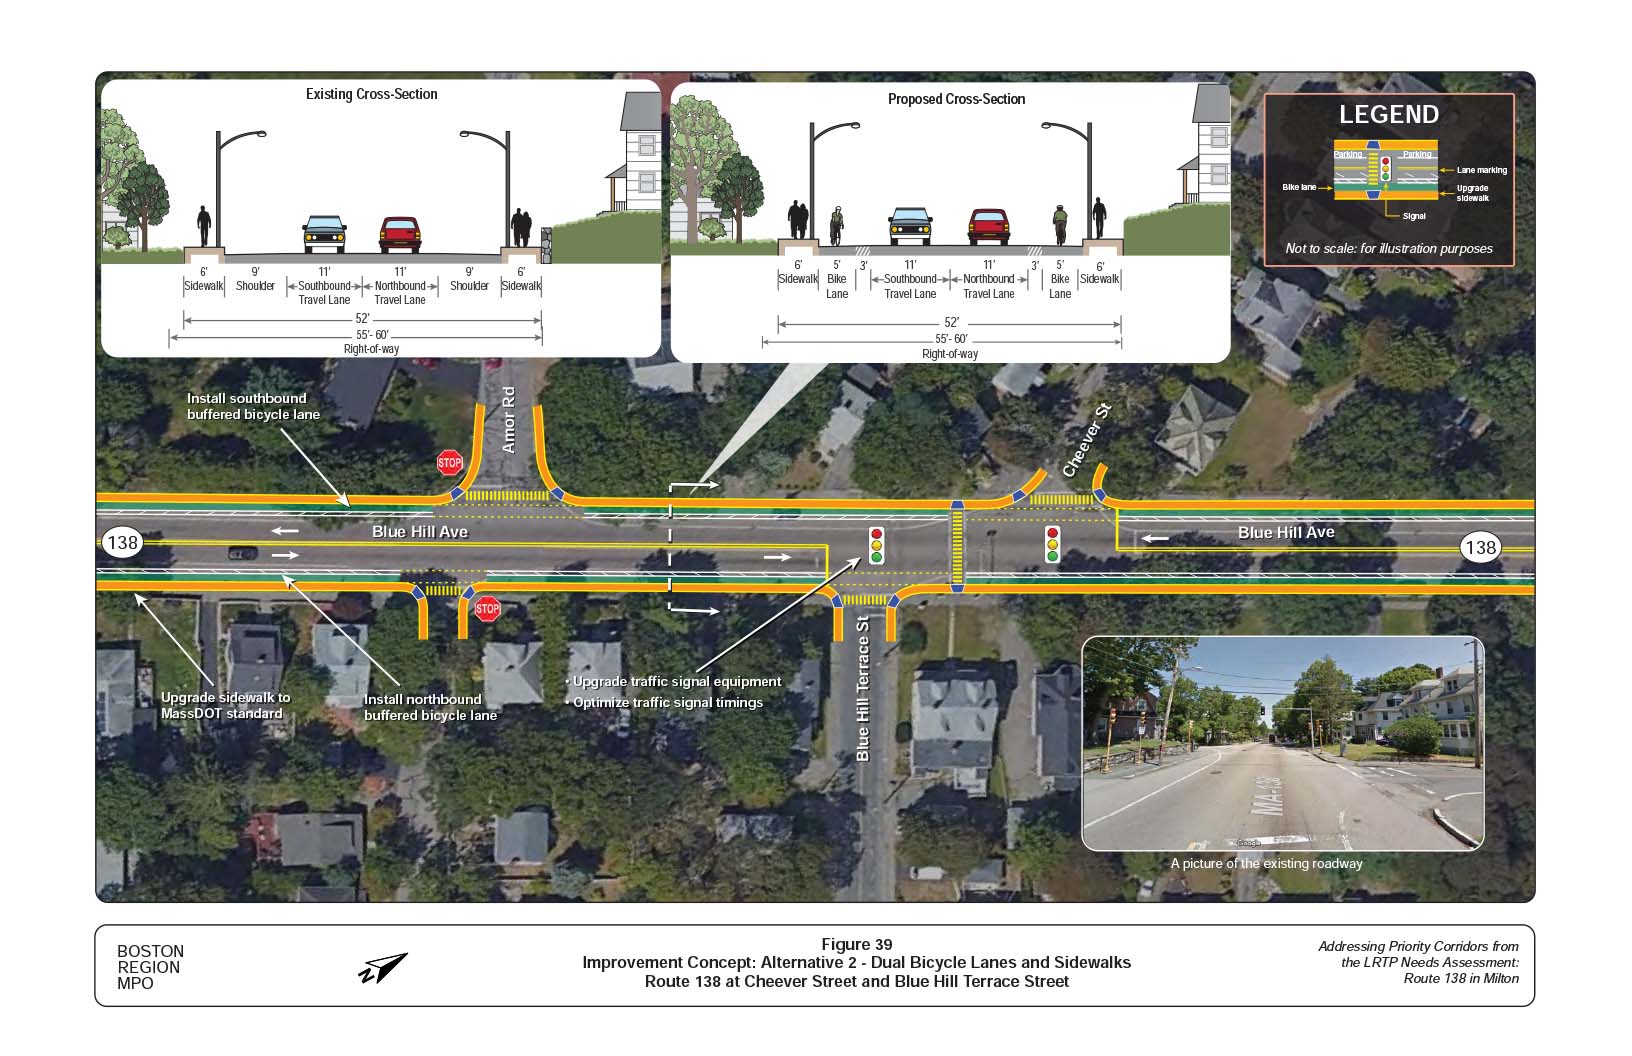 Figure 39 is an aerial photo of Route 138 at Cheever Street and Blue Hill Avenue showing Alternative 2, dual bicycle lanes and sidewalks, and overlays showing the existing and proposed cross-sections.